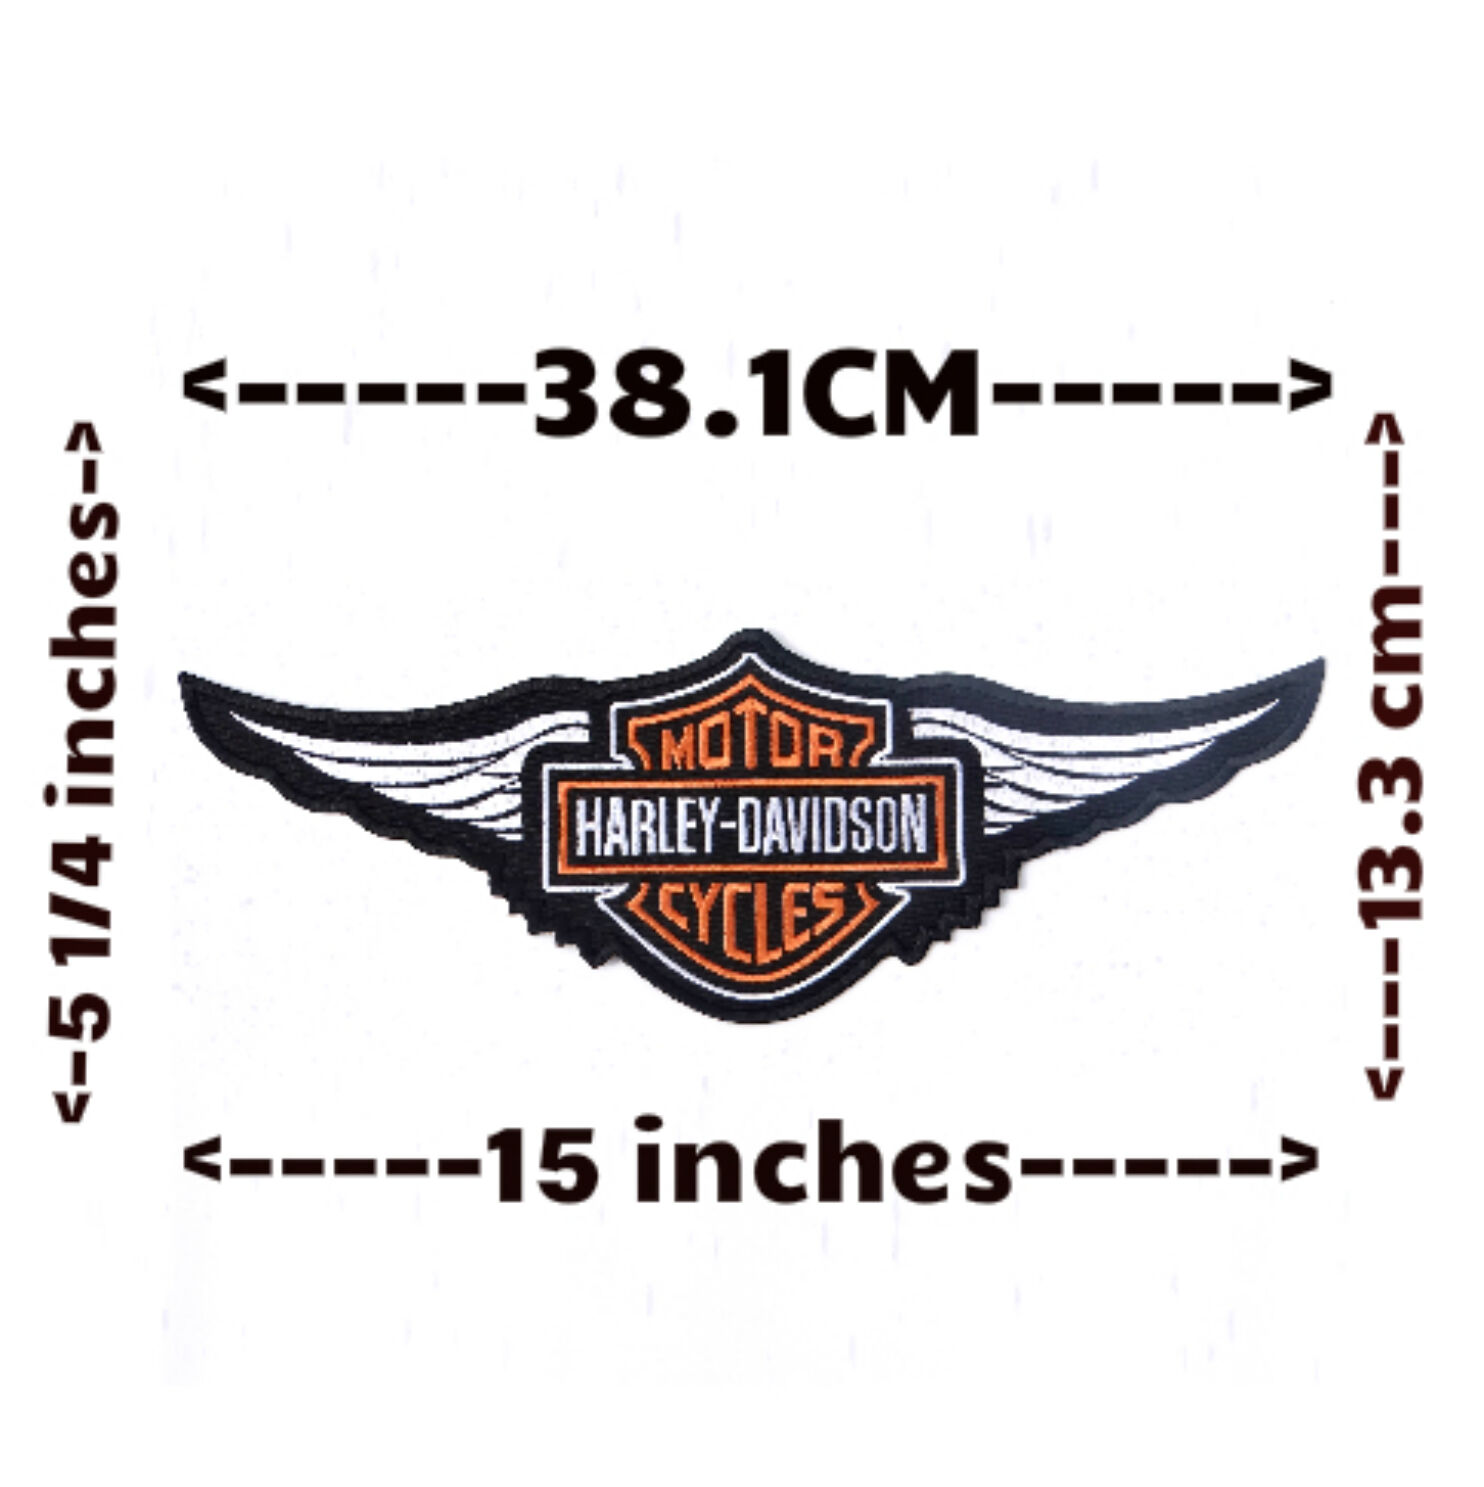 HARLEY DAVIDSON Motor Cycles Iron-On PATCH Silver Black White Orange SIZE Small